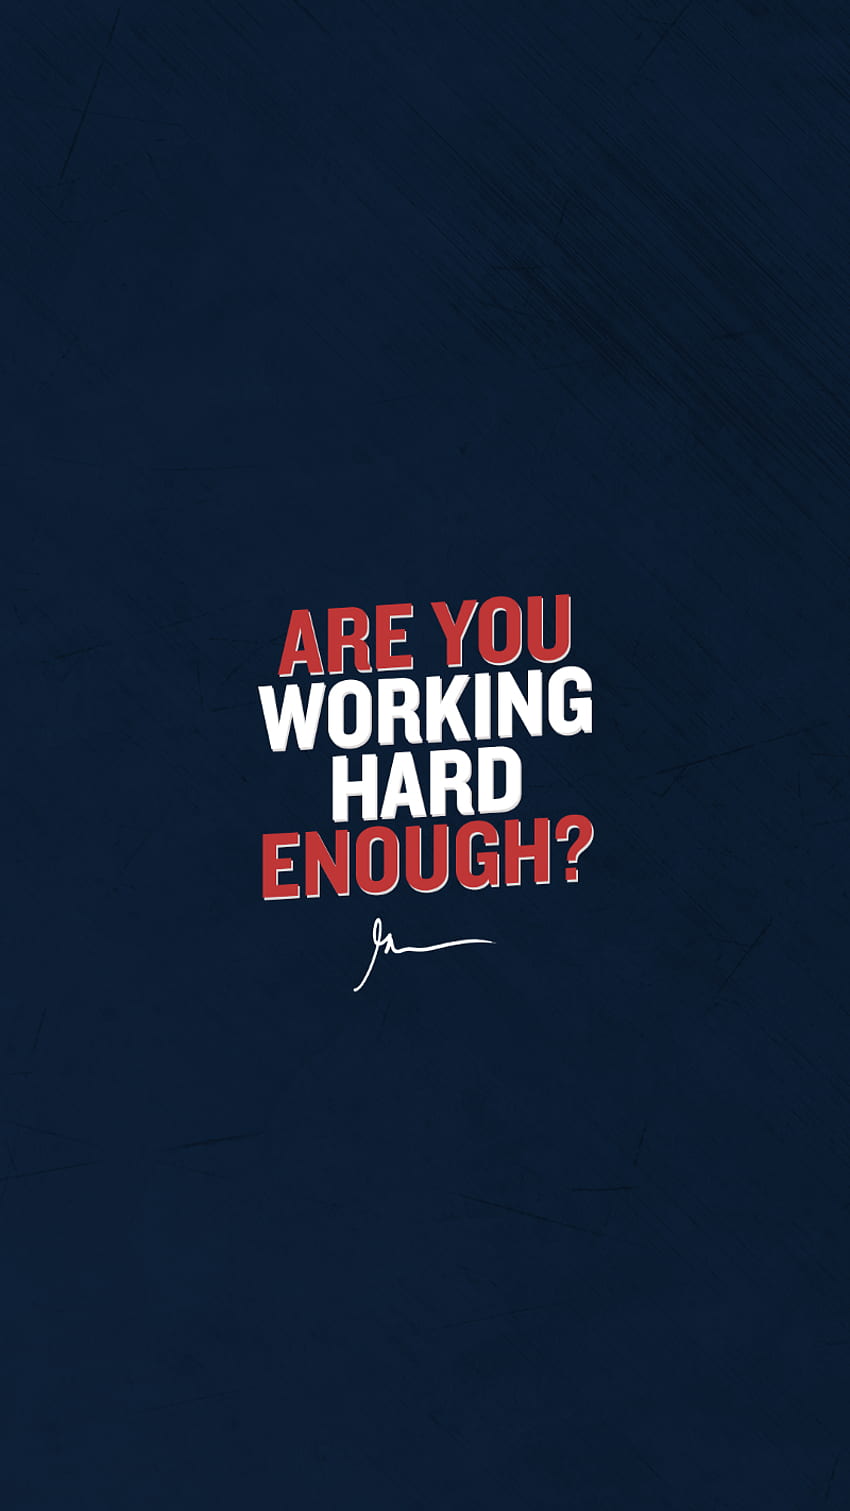 Work Hard Quotes Wallpapers  Top Free Work Hard Quotes Backgrounds   WallpaperAccess